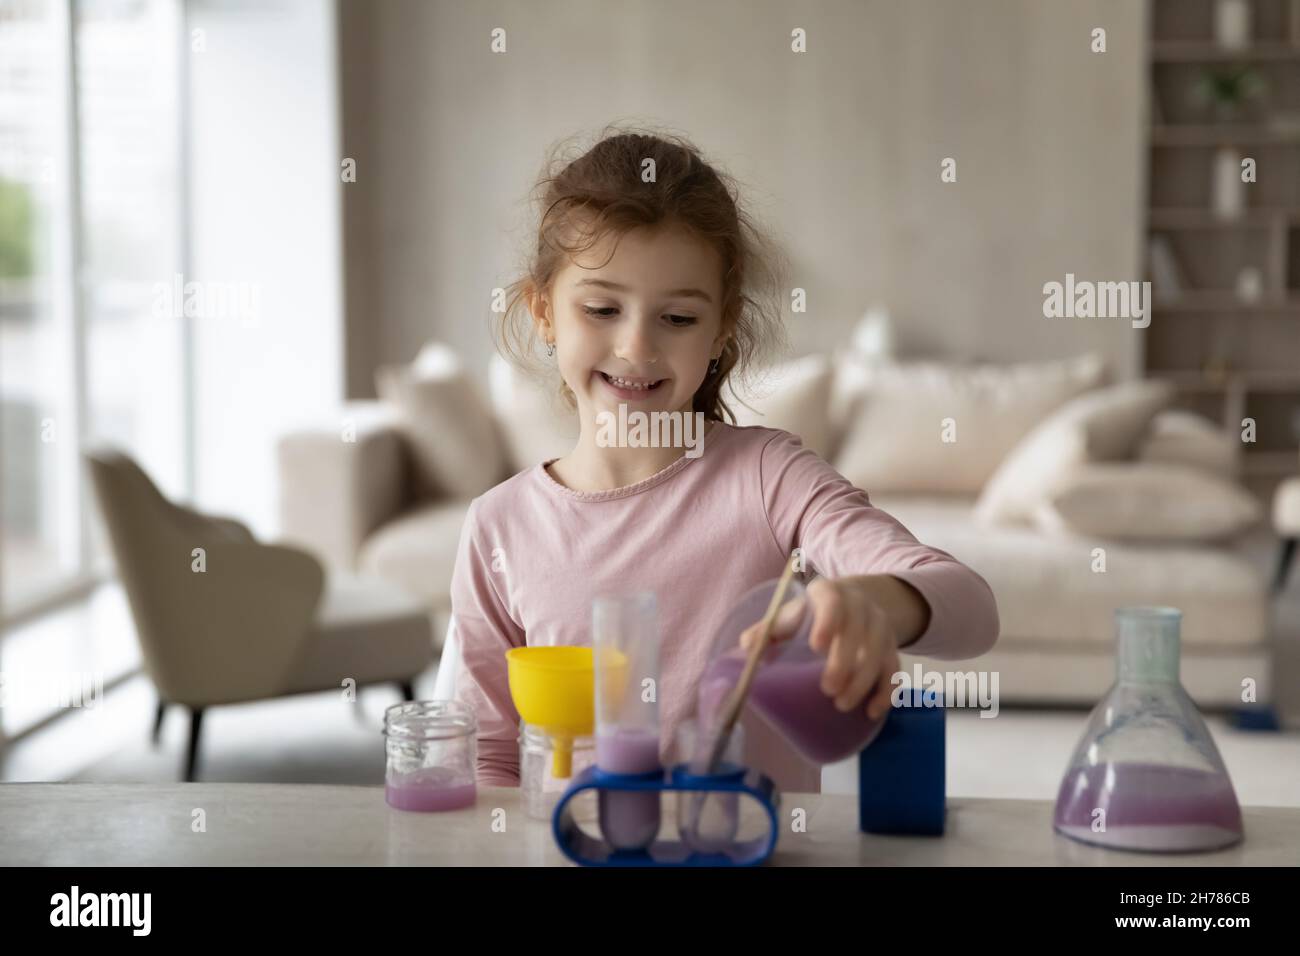 Curious smiling little girl playing with toy laboratory, chemistry experiments Stock Photo